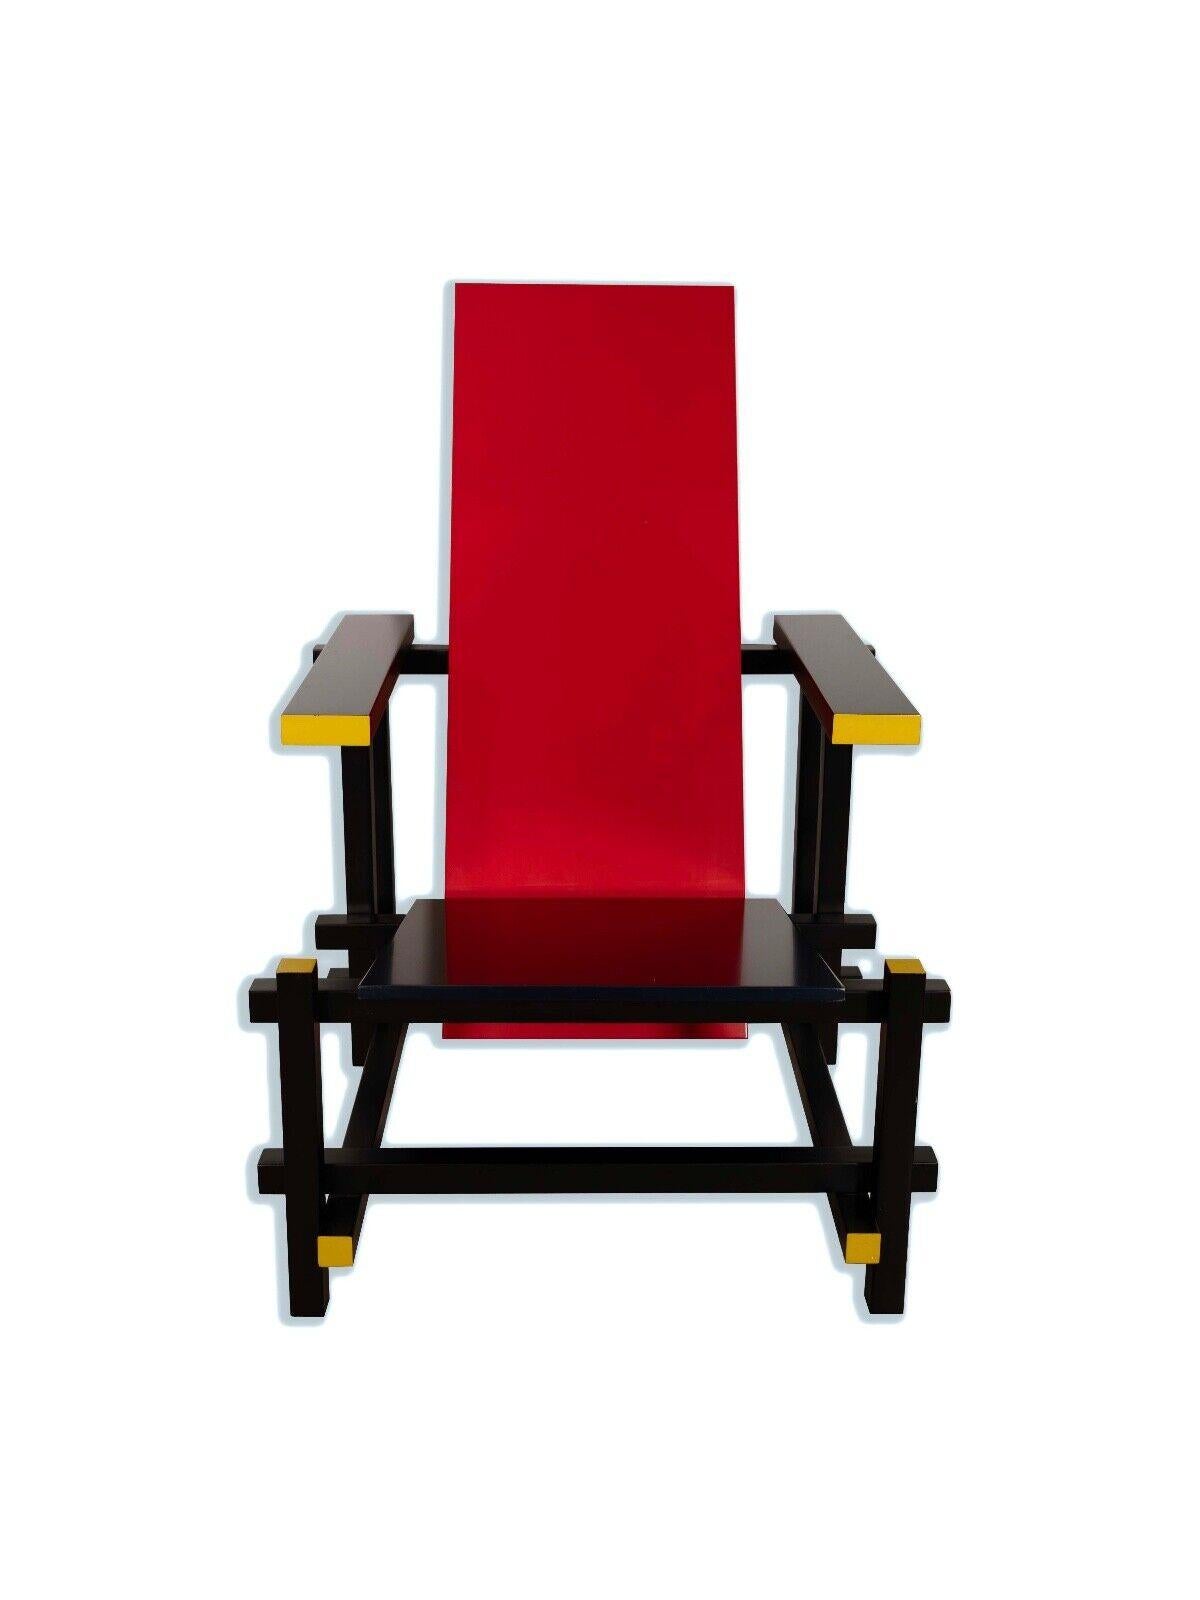 Cassina Red Blue and Yellow Chair Gerrit Thomas Rietvild Post Modern In Good Condition For Sale In Keego Harbor, MI